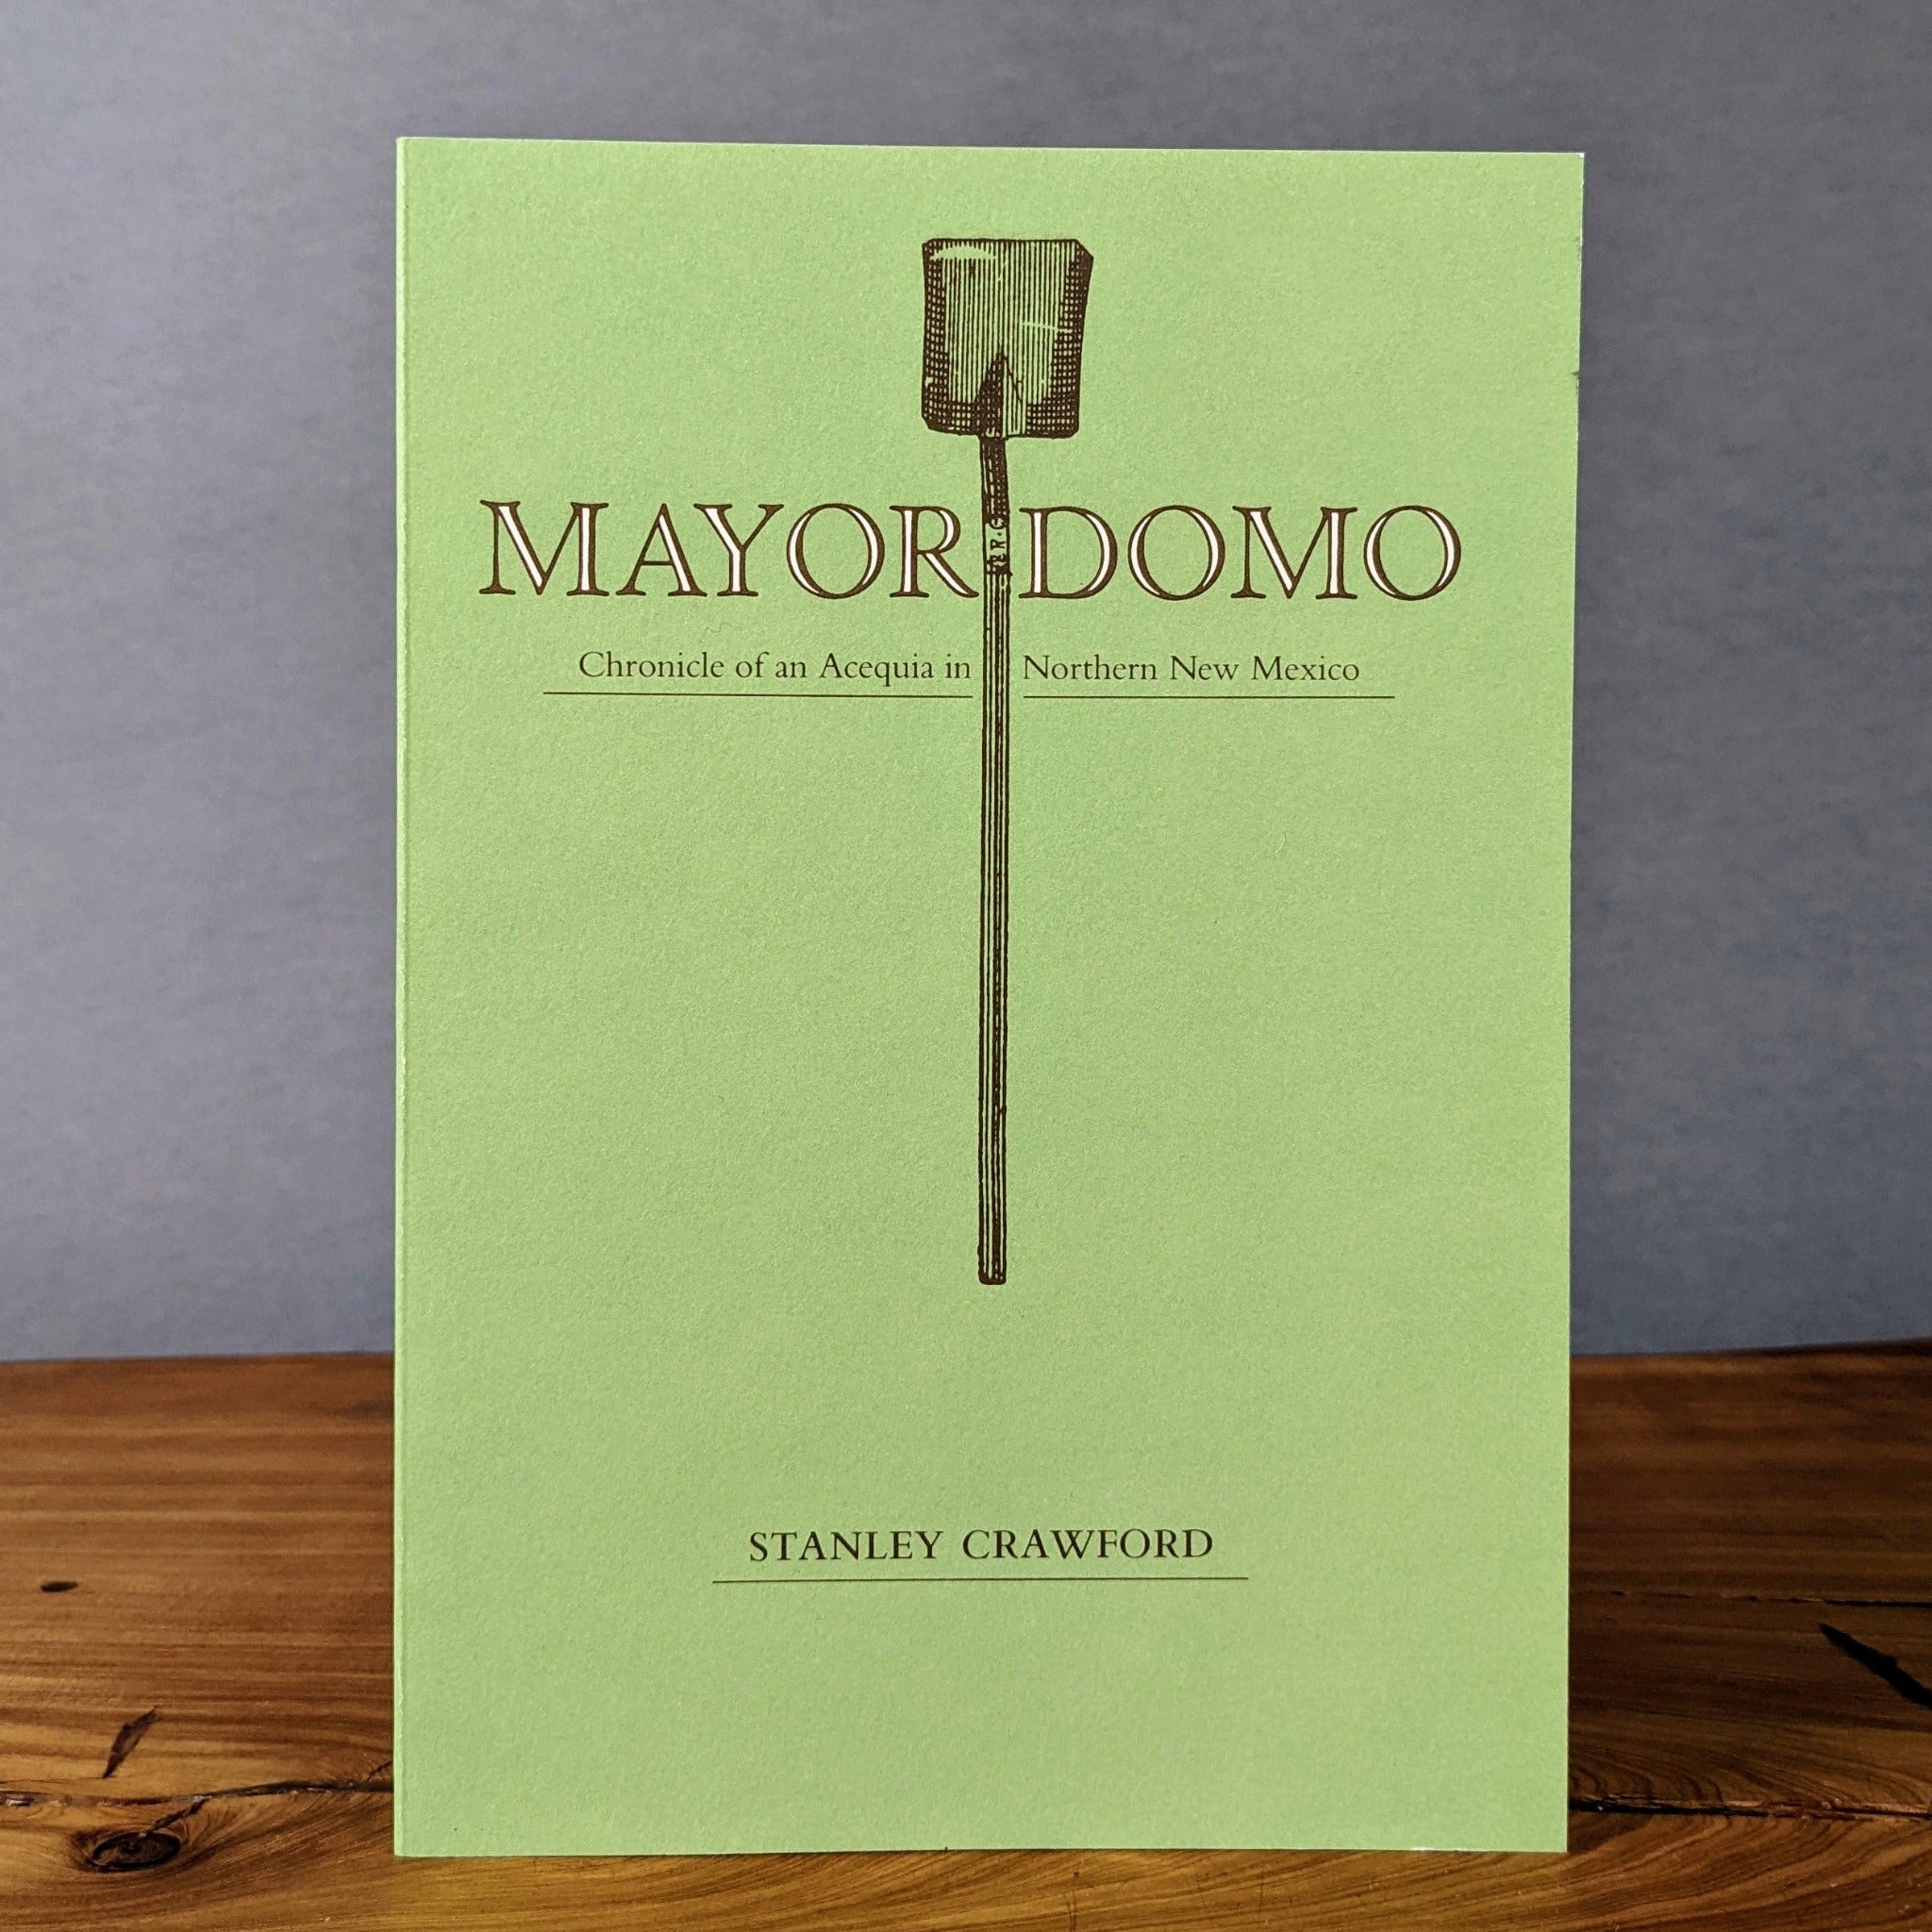 Mayordomo: Chronicle of an Acequia in Northern New Mexico - Los Poblanos Farm Shop